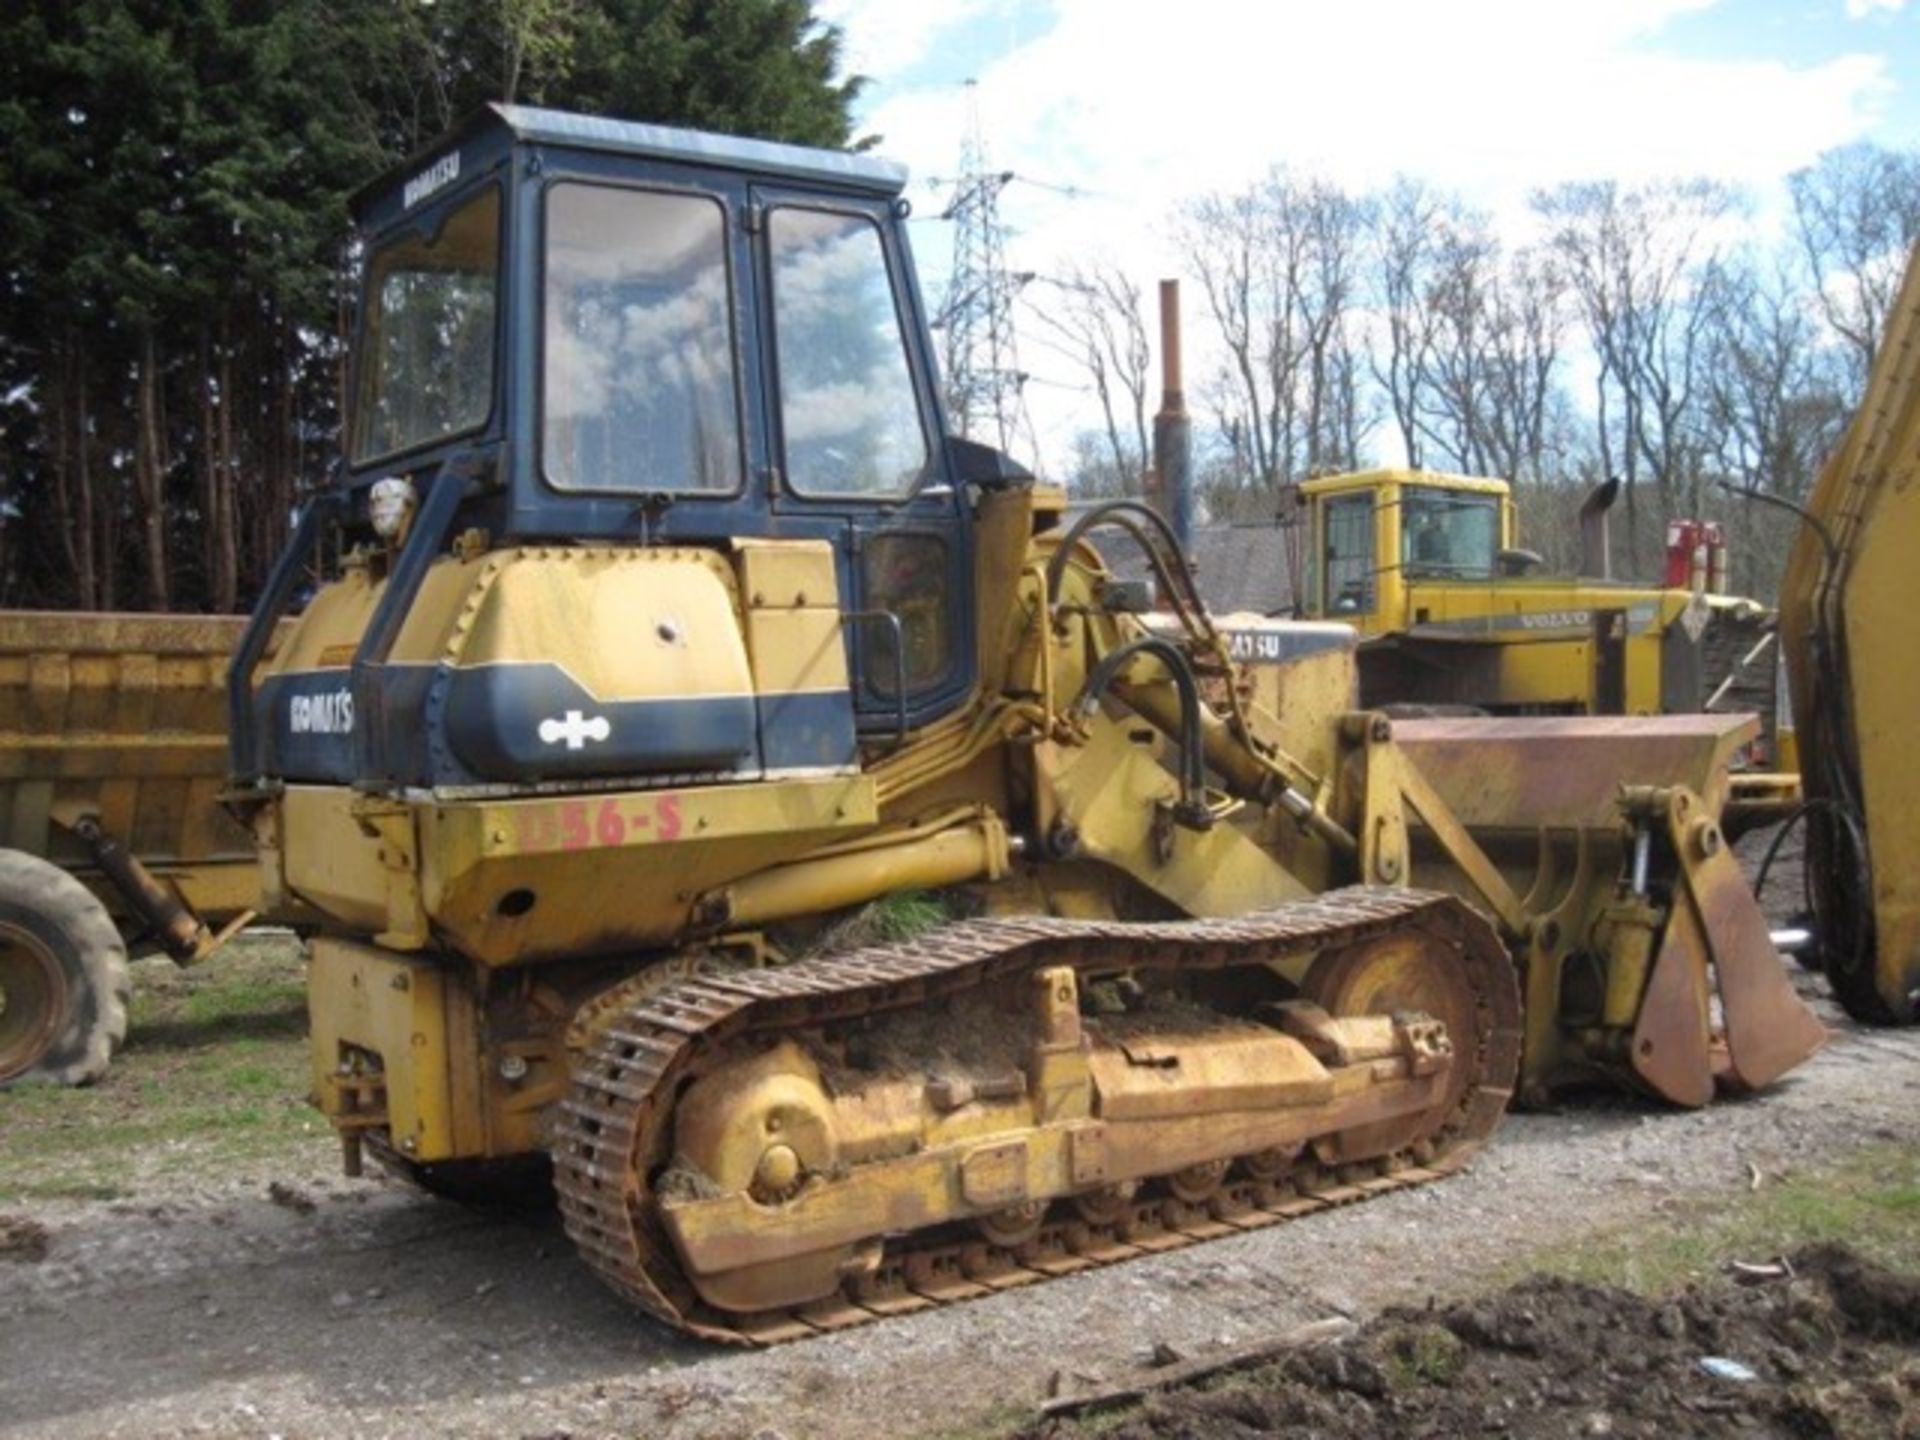 Komatsu Tracked Loading Shovel
Good condition for age, 4 in 1 bucket with teeth and good